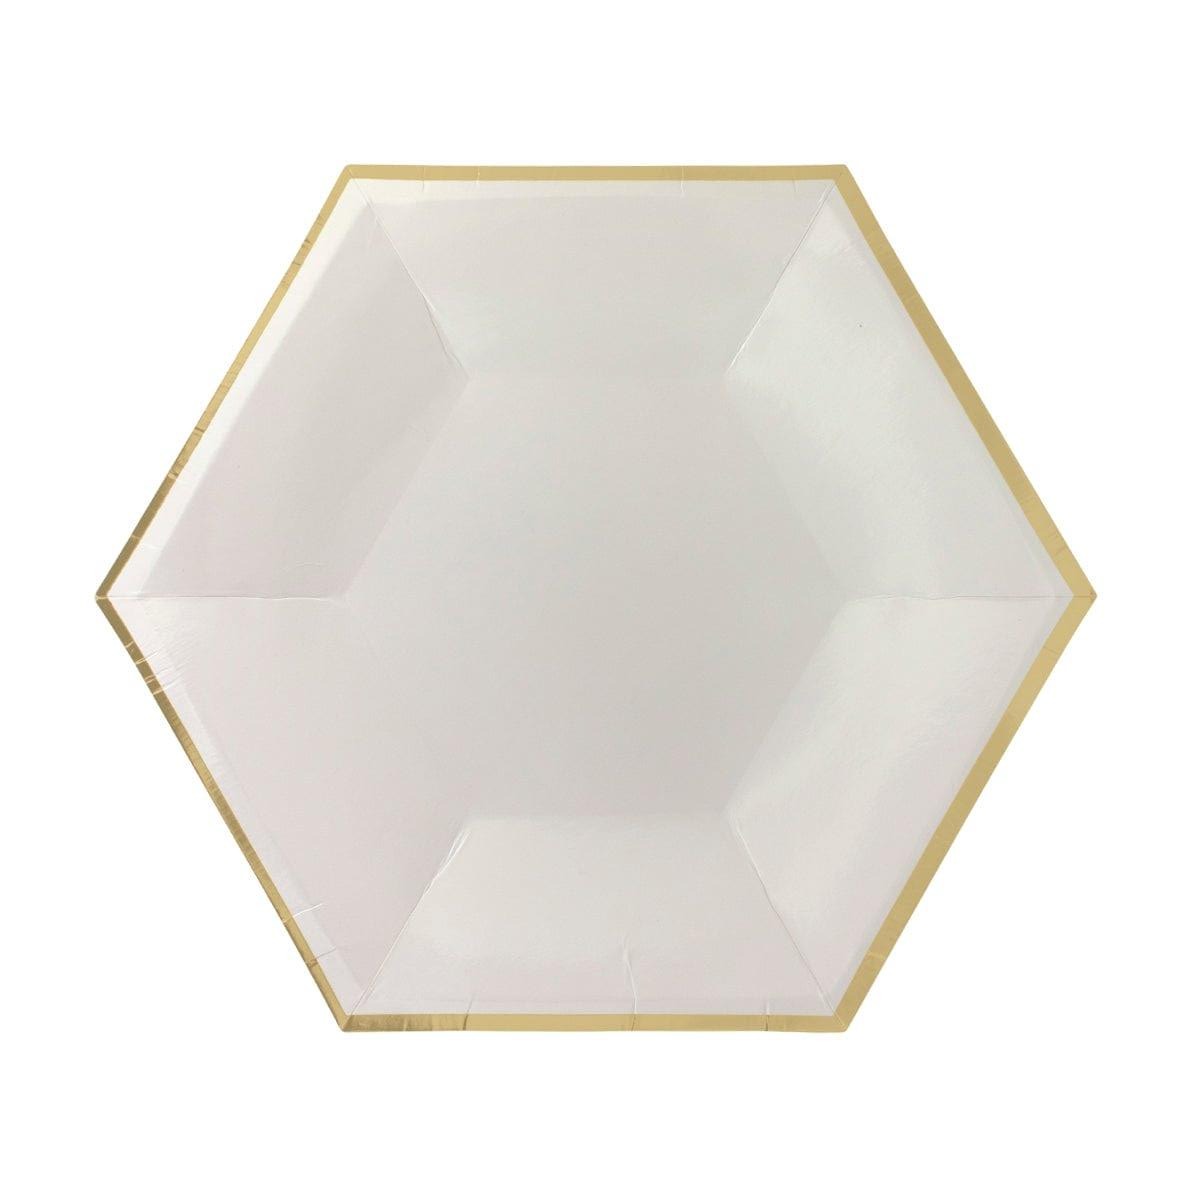 YIWU SANDY PAPER PRODUCTS CO., LTD Everyday Entertaining Hexagon White Plates, 9 Inches, 8 Count